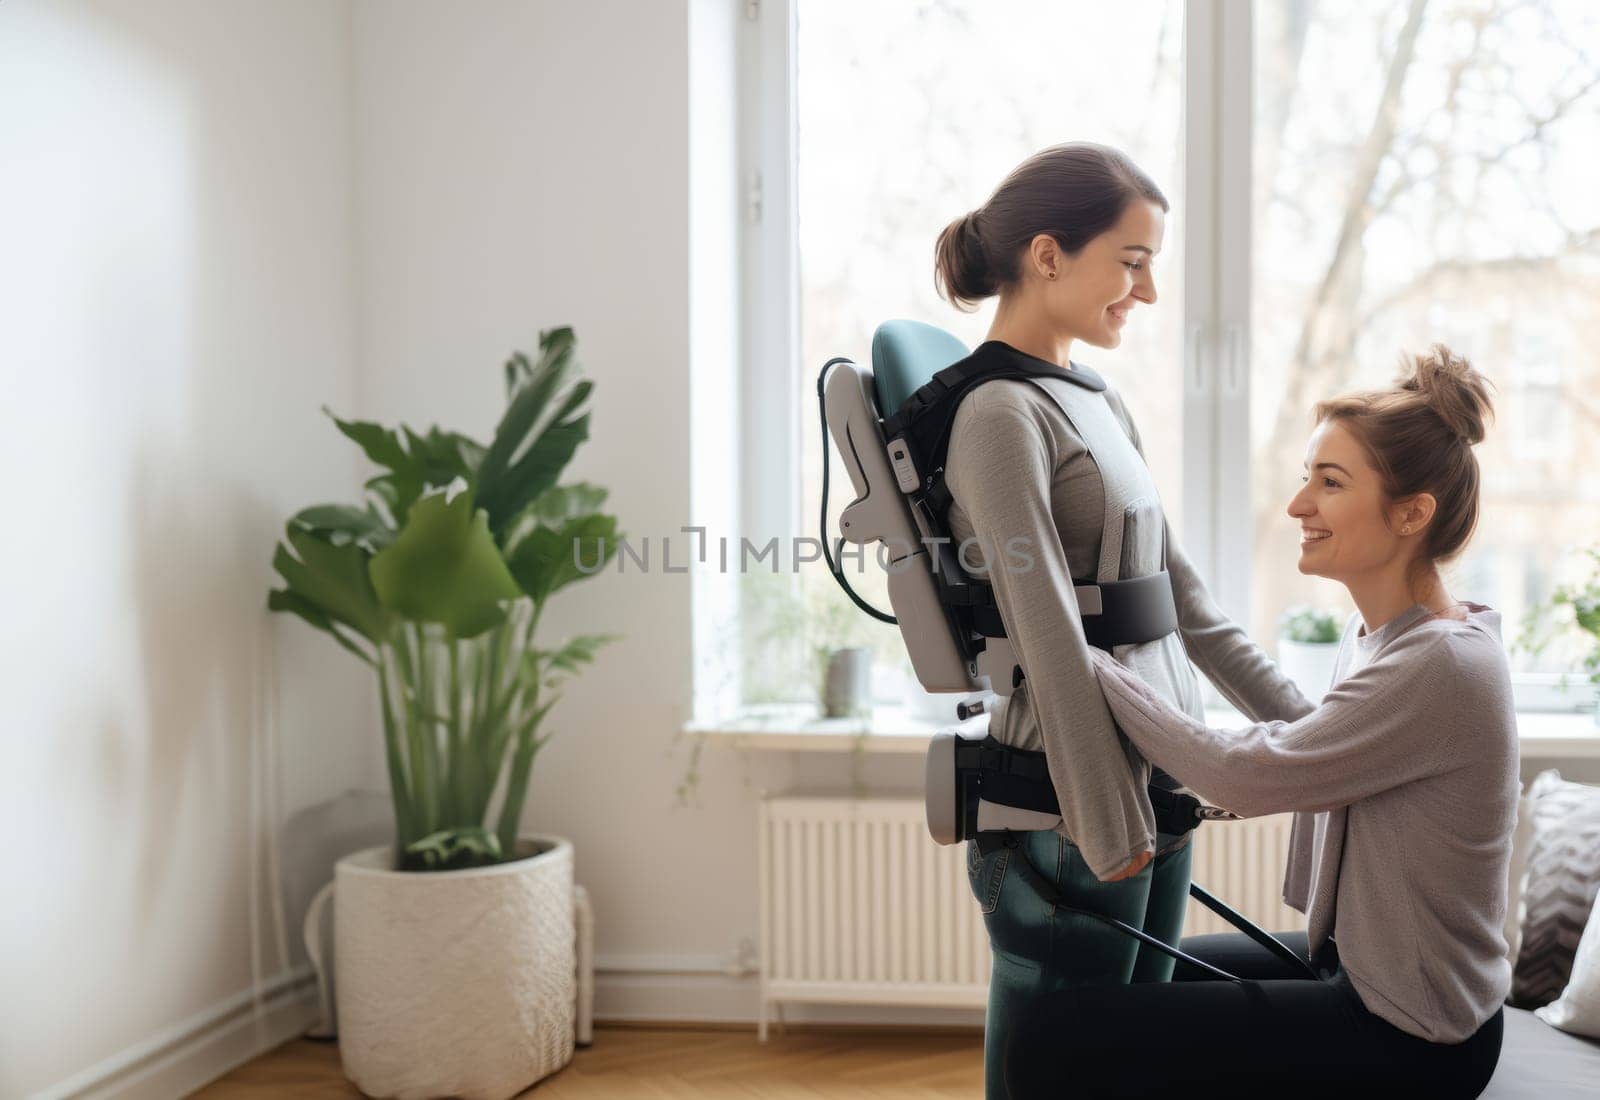 Compassionate Home Visit: Doctor Attends to Patient in Wheelchair with Broken Neck.Generated image by dotshock